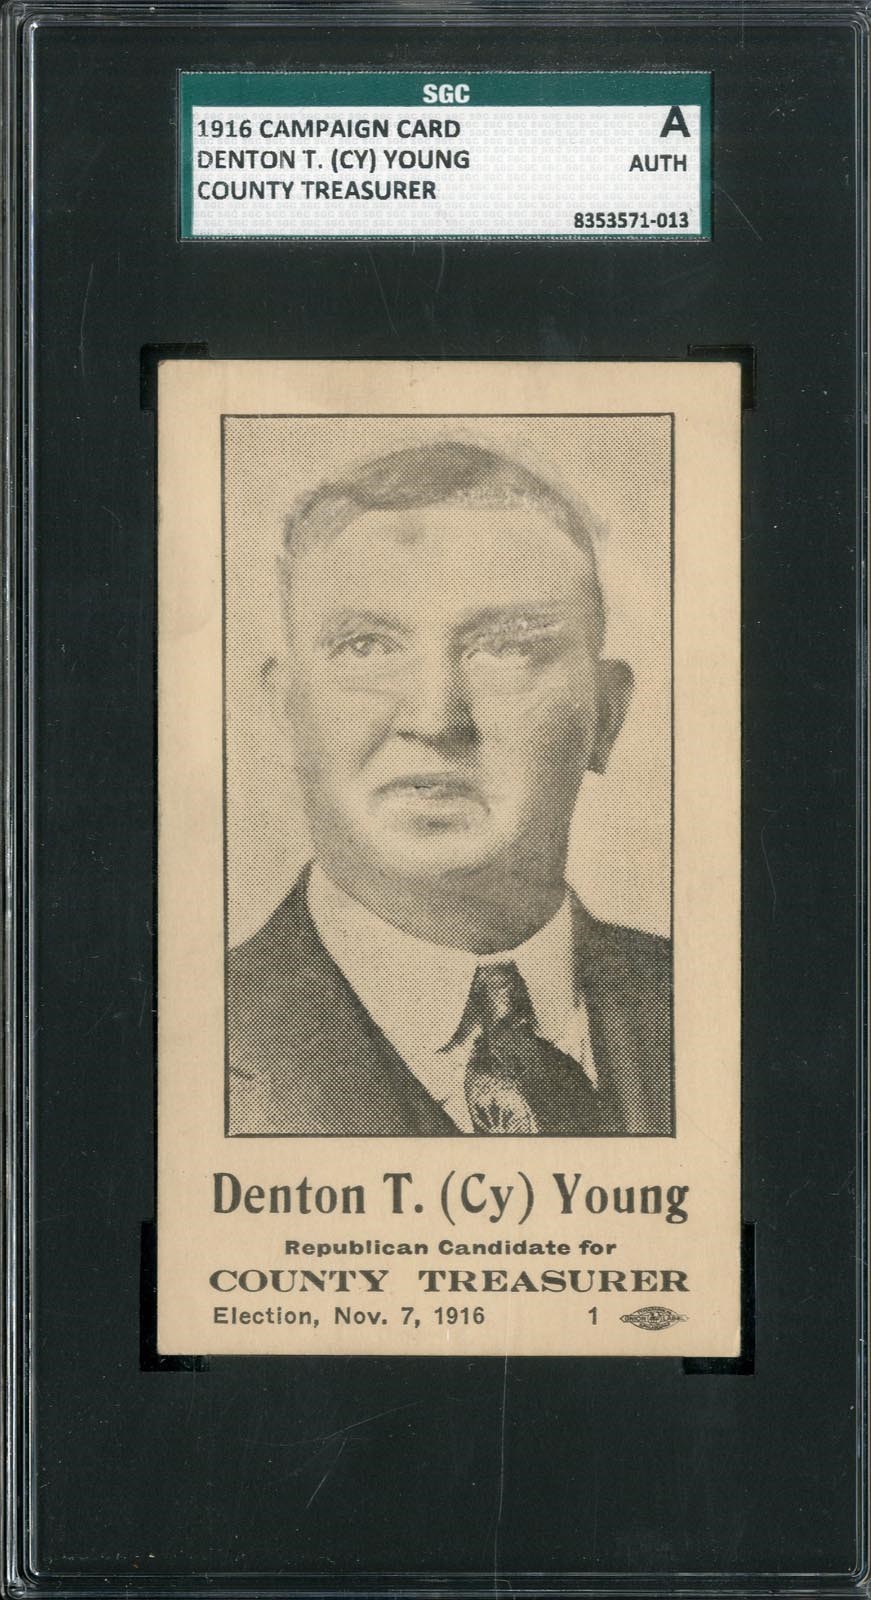 Baseball and Trading Cards - 1916 Cy Young For County Treasurer Political Campaign Card (SGC)